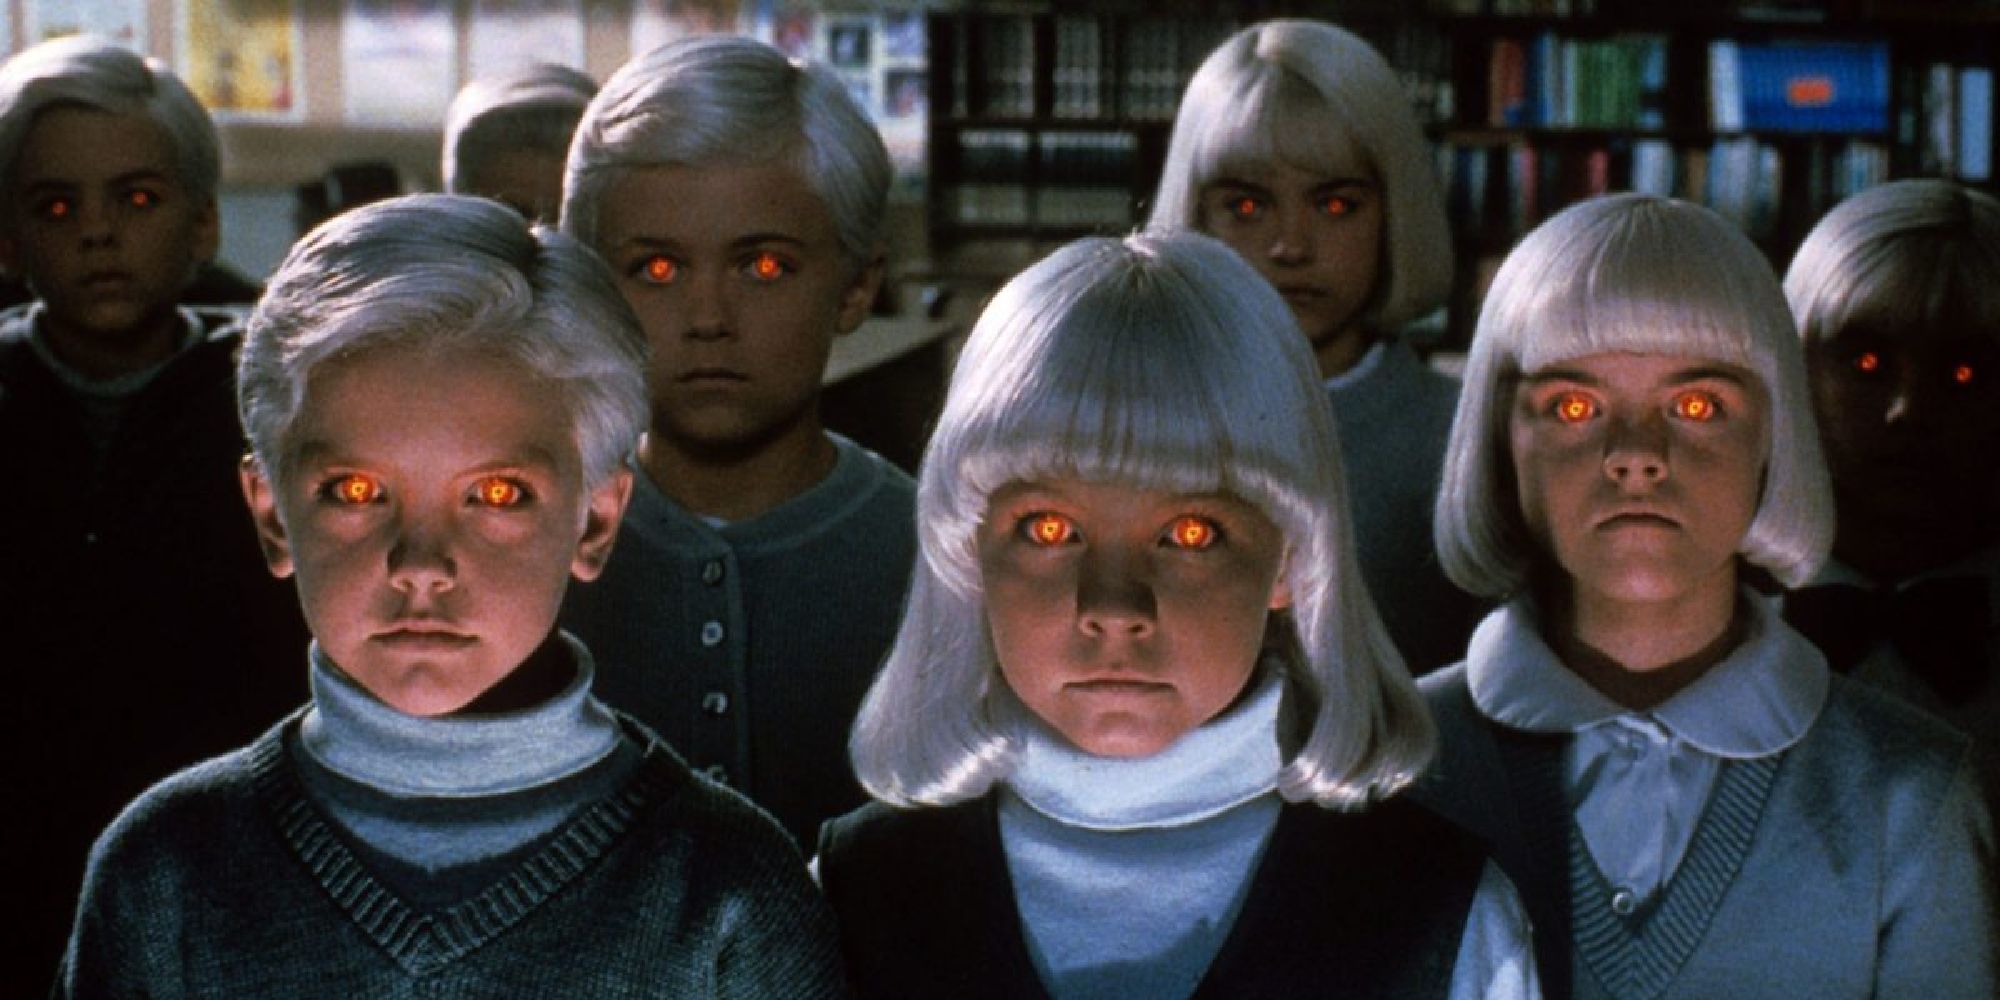 The evil village children with glowing eyes.